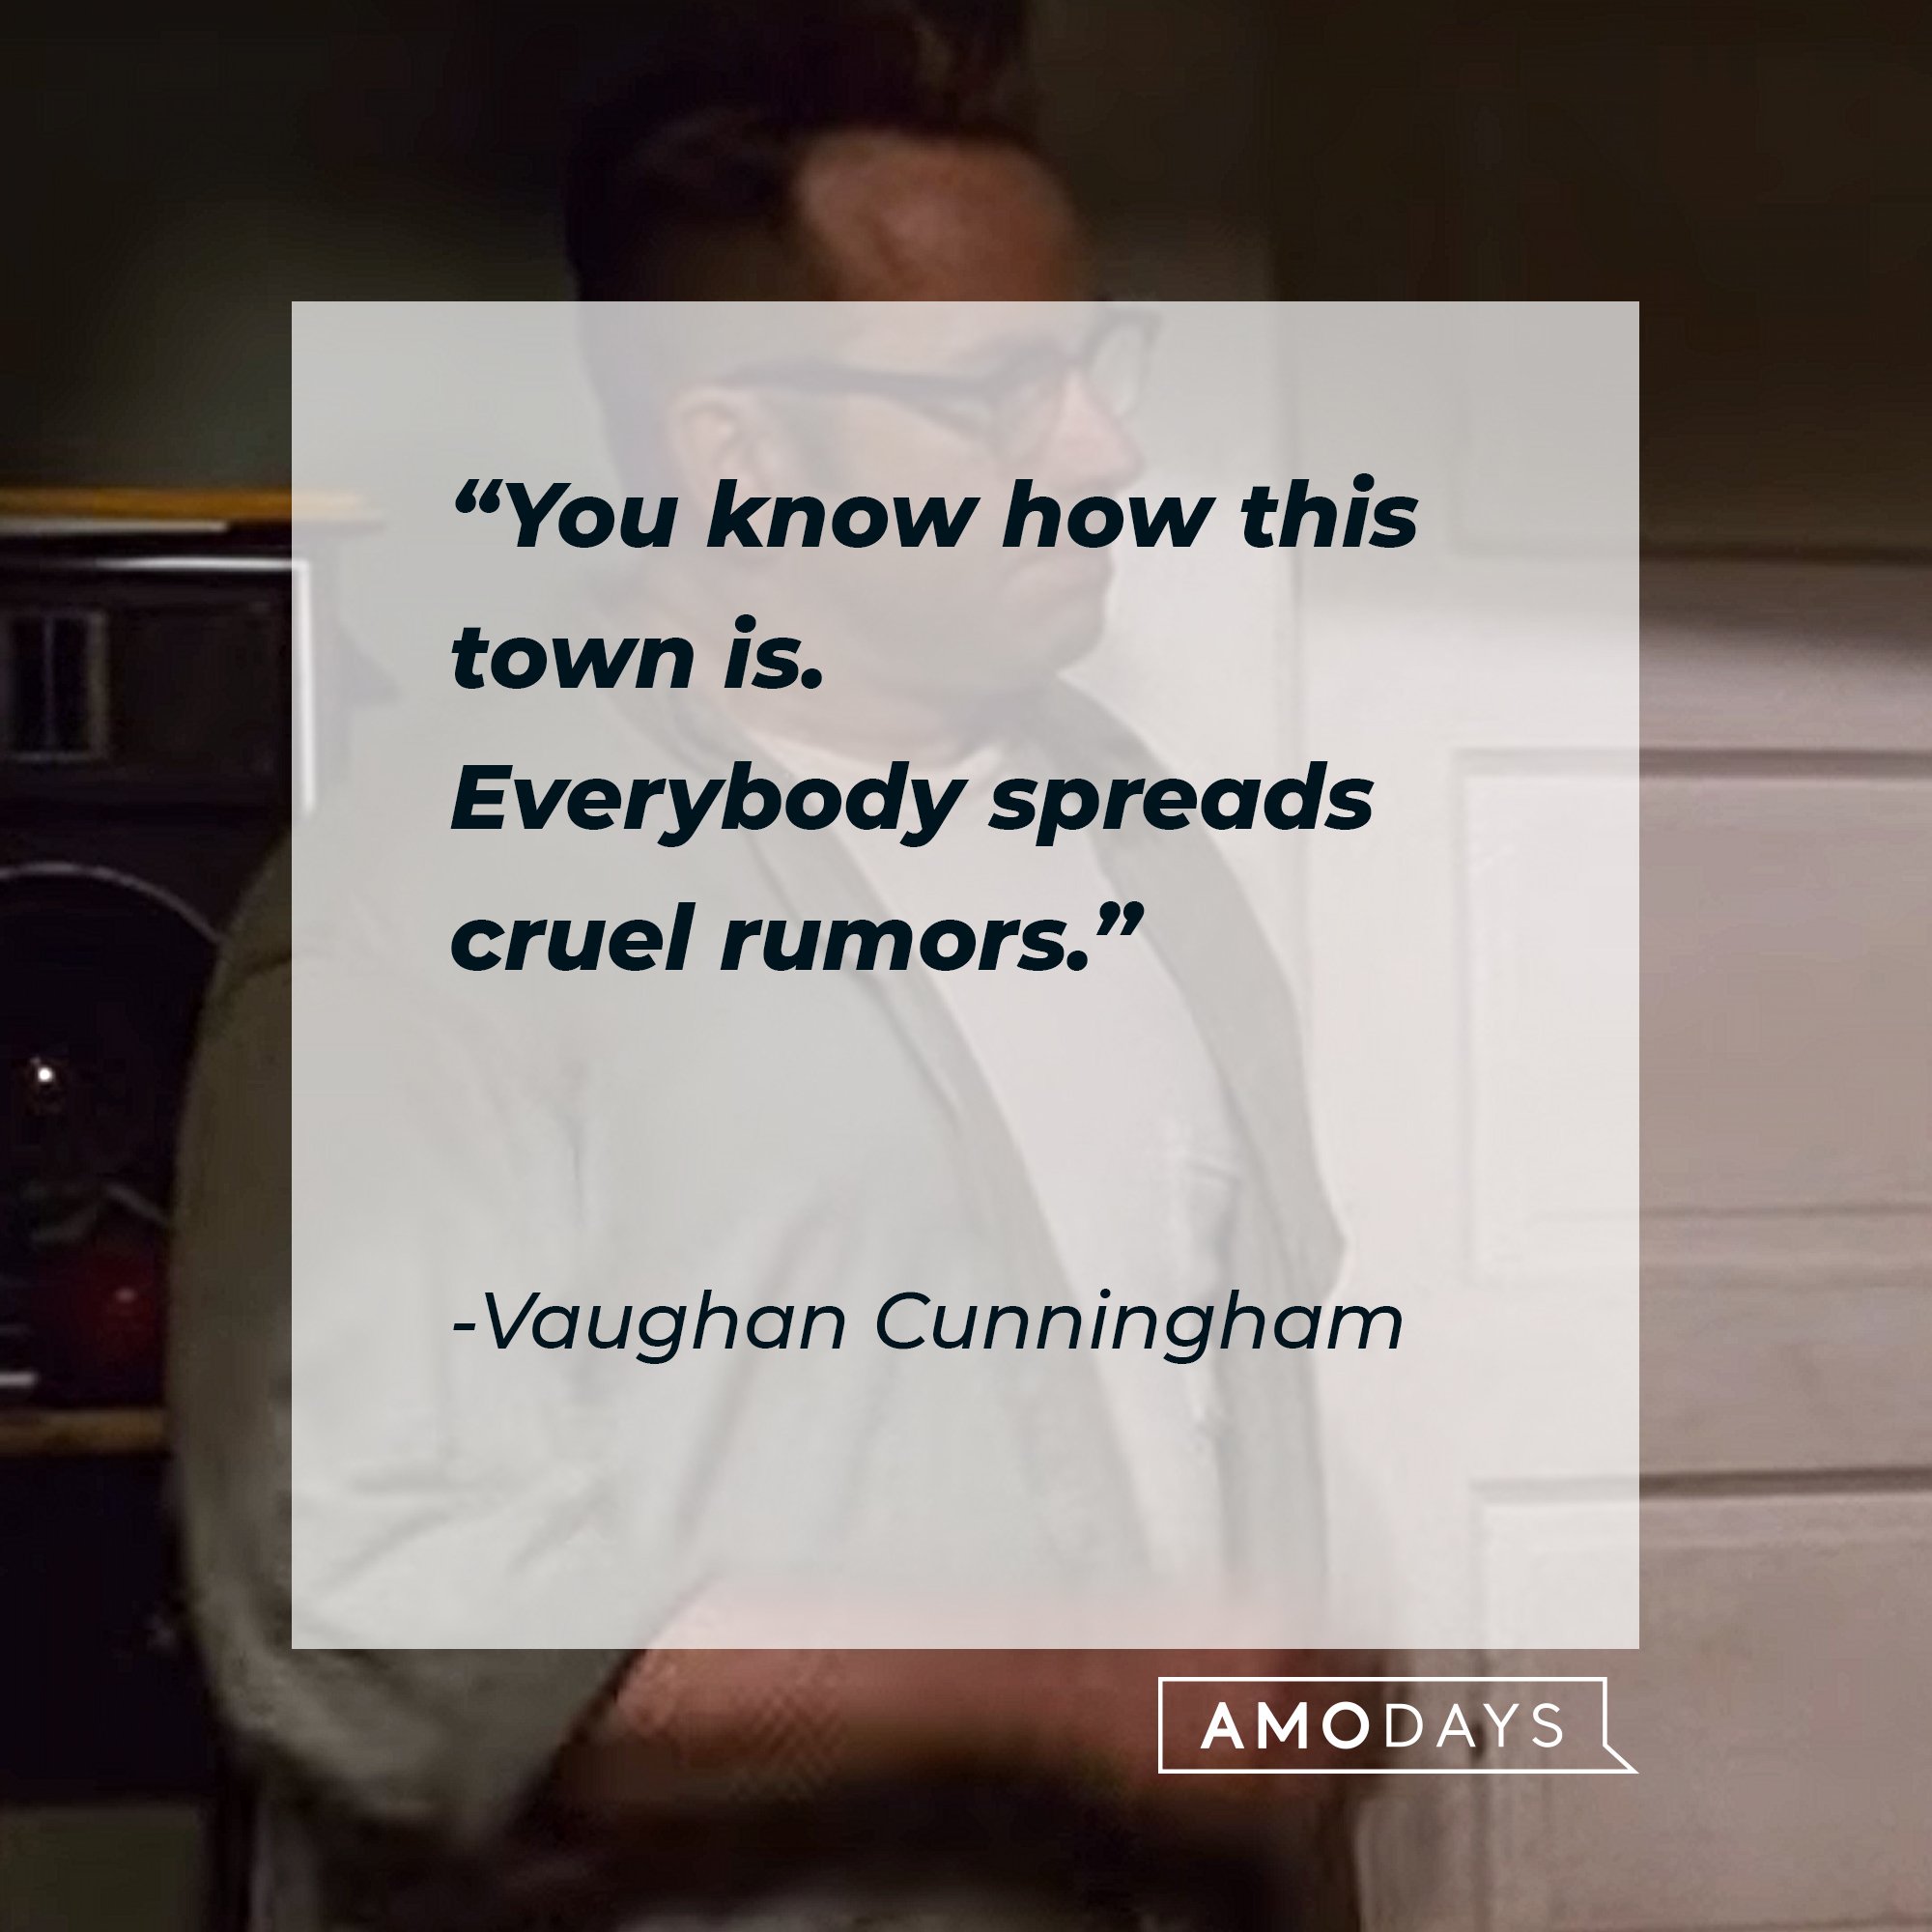  Vaughan Cunningham's quote: "You know how this town is. Everybody spreads cruel rumors." | Image: AmoDays